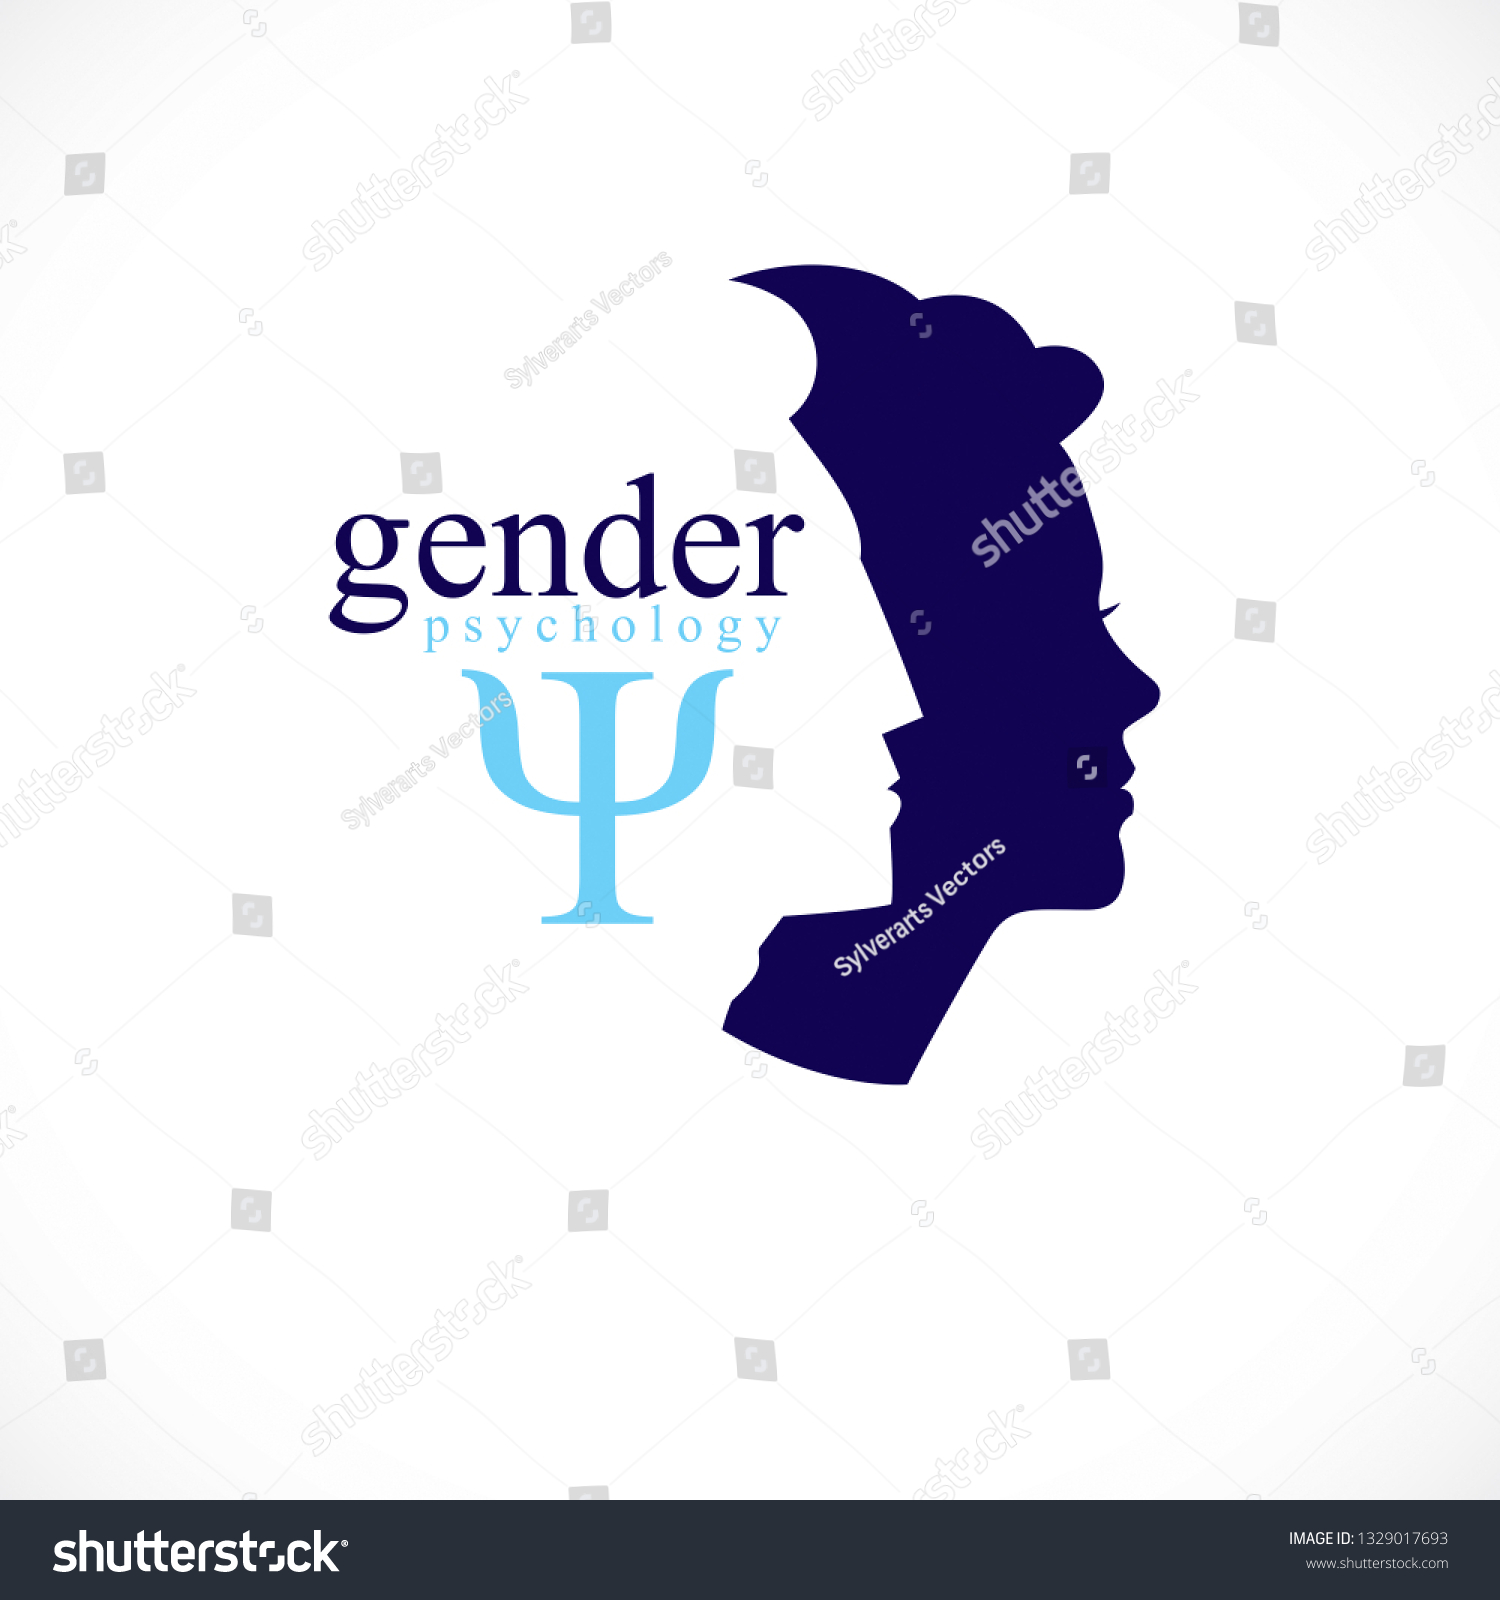 Gender Psychology Concept Created Man Woman Stock Vector Royalty Free 1329017693 Shutterstock 5942